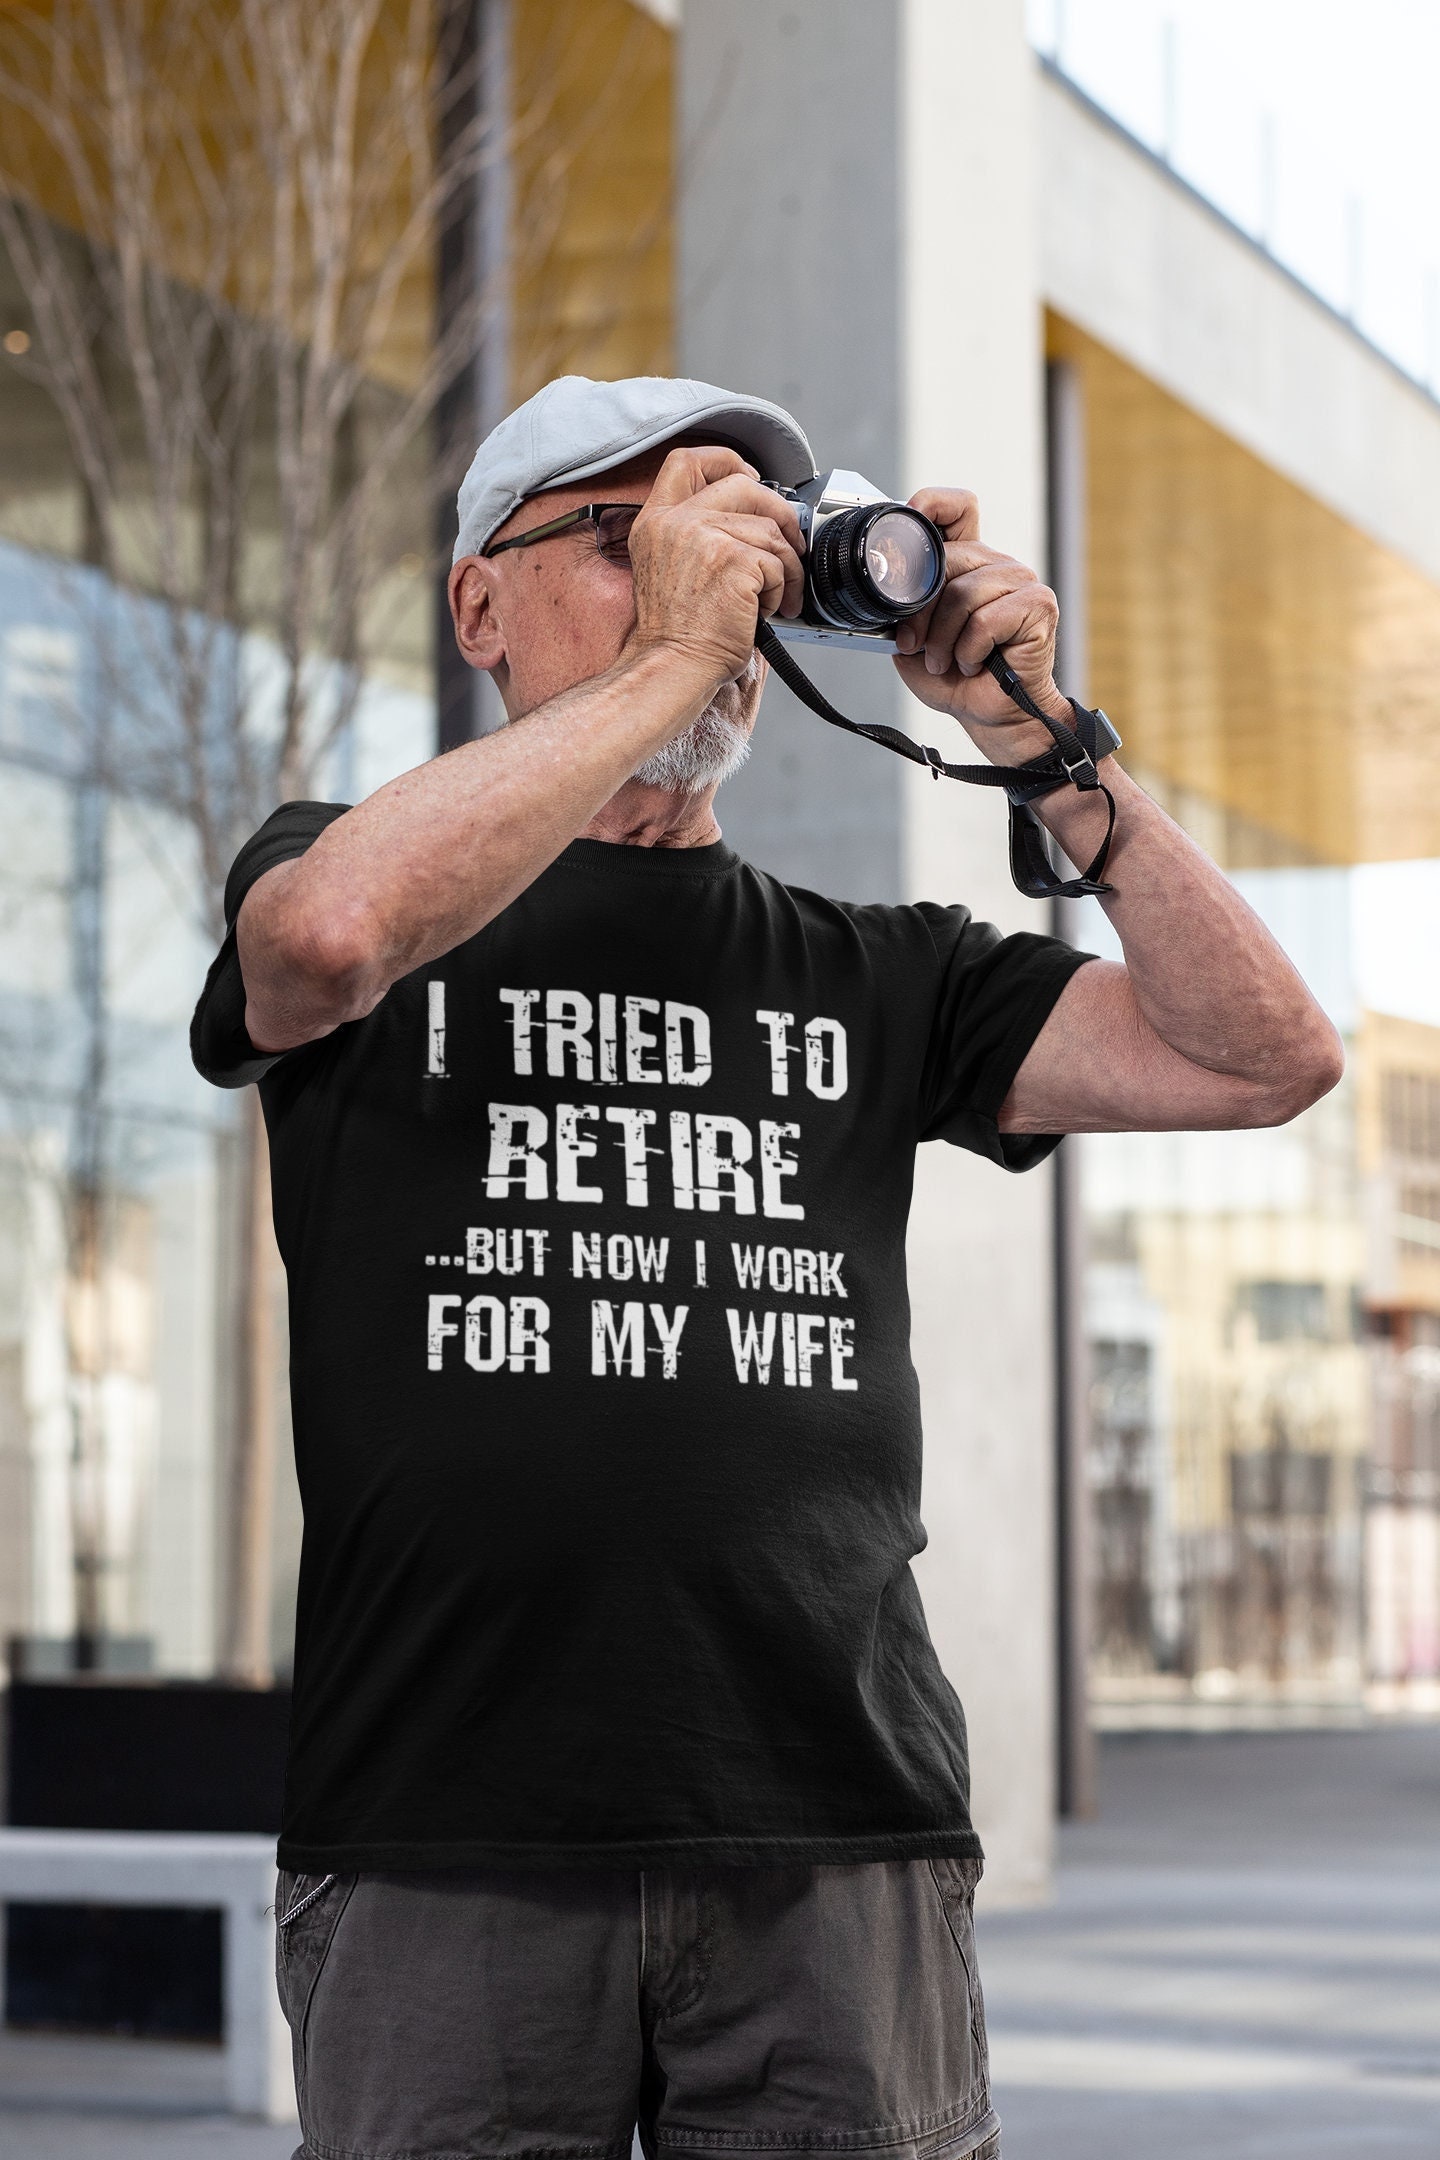 Funny Retirement Shirt, Retired And Work For My Wife , Retirement T-shirt, Retirement Shirts For Men Women, Funny Retirement Gifts